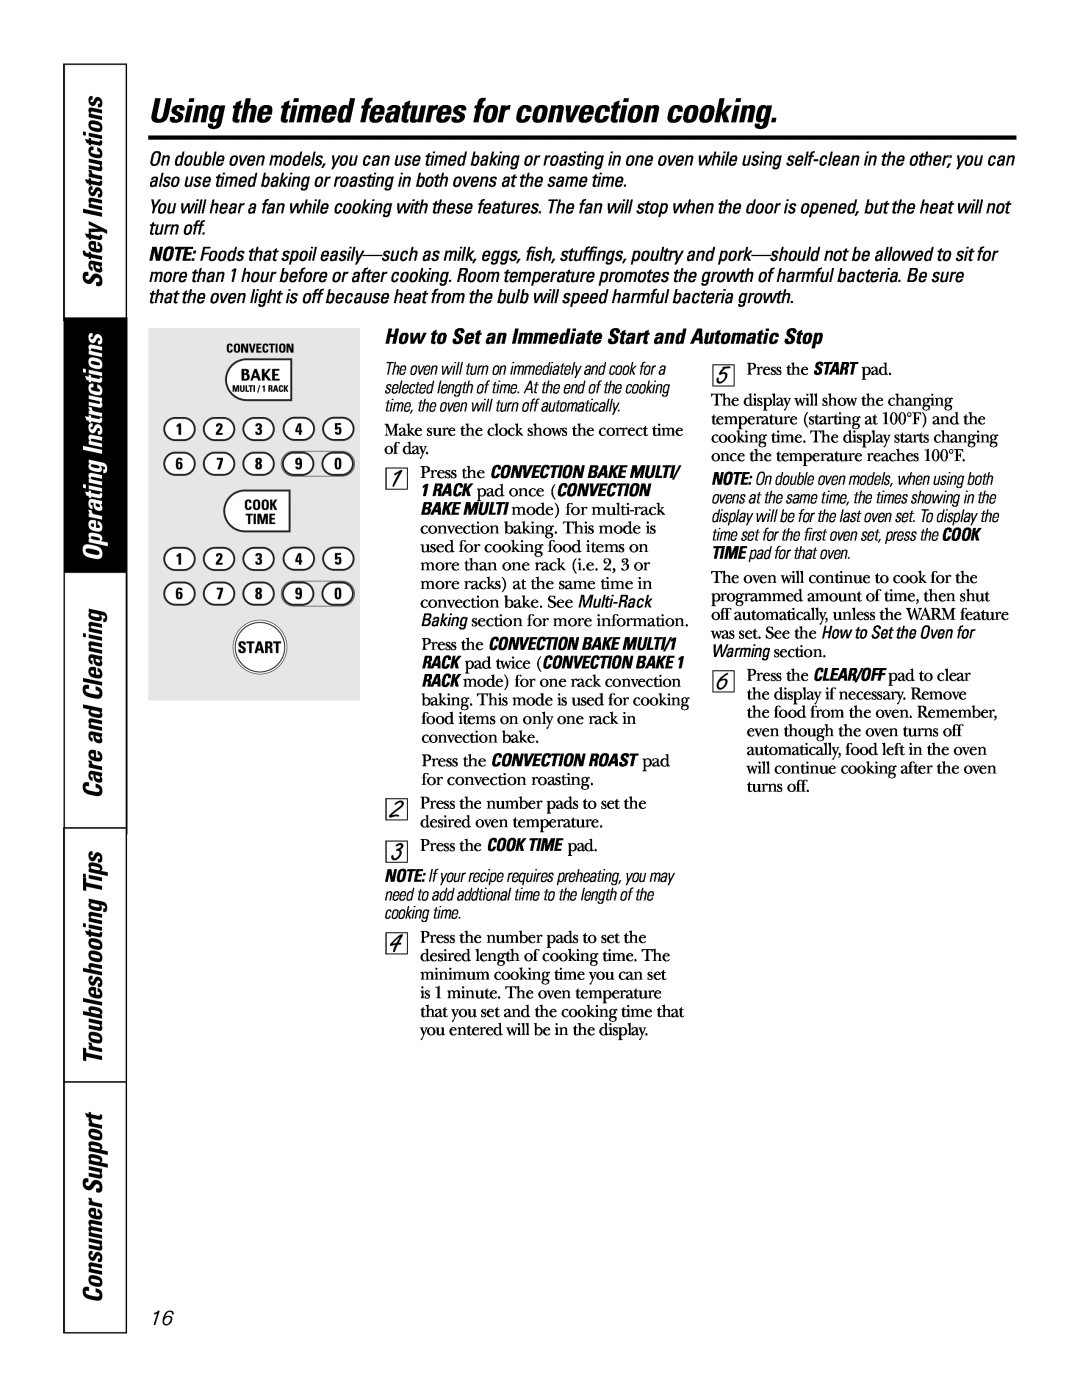 GE JK91527 Using the timed features for convection cooking, Care and Cleaning Operating Instructions, Safety Instructions 